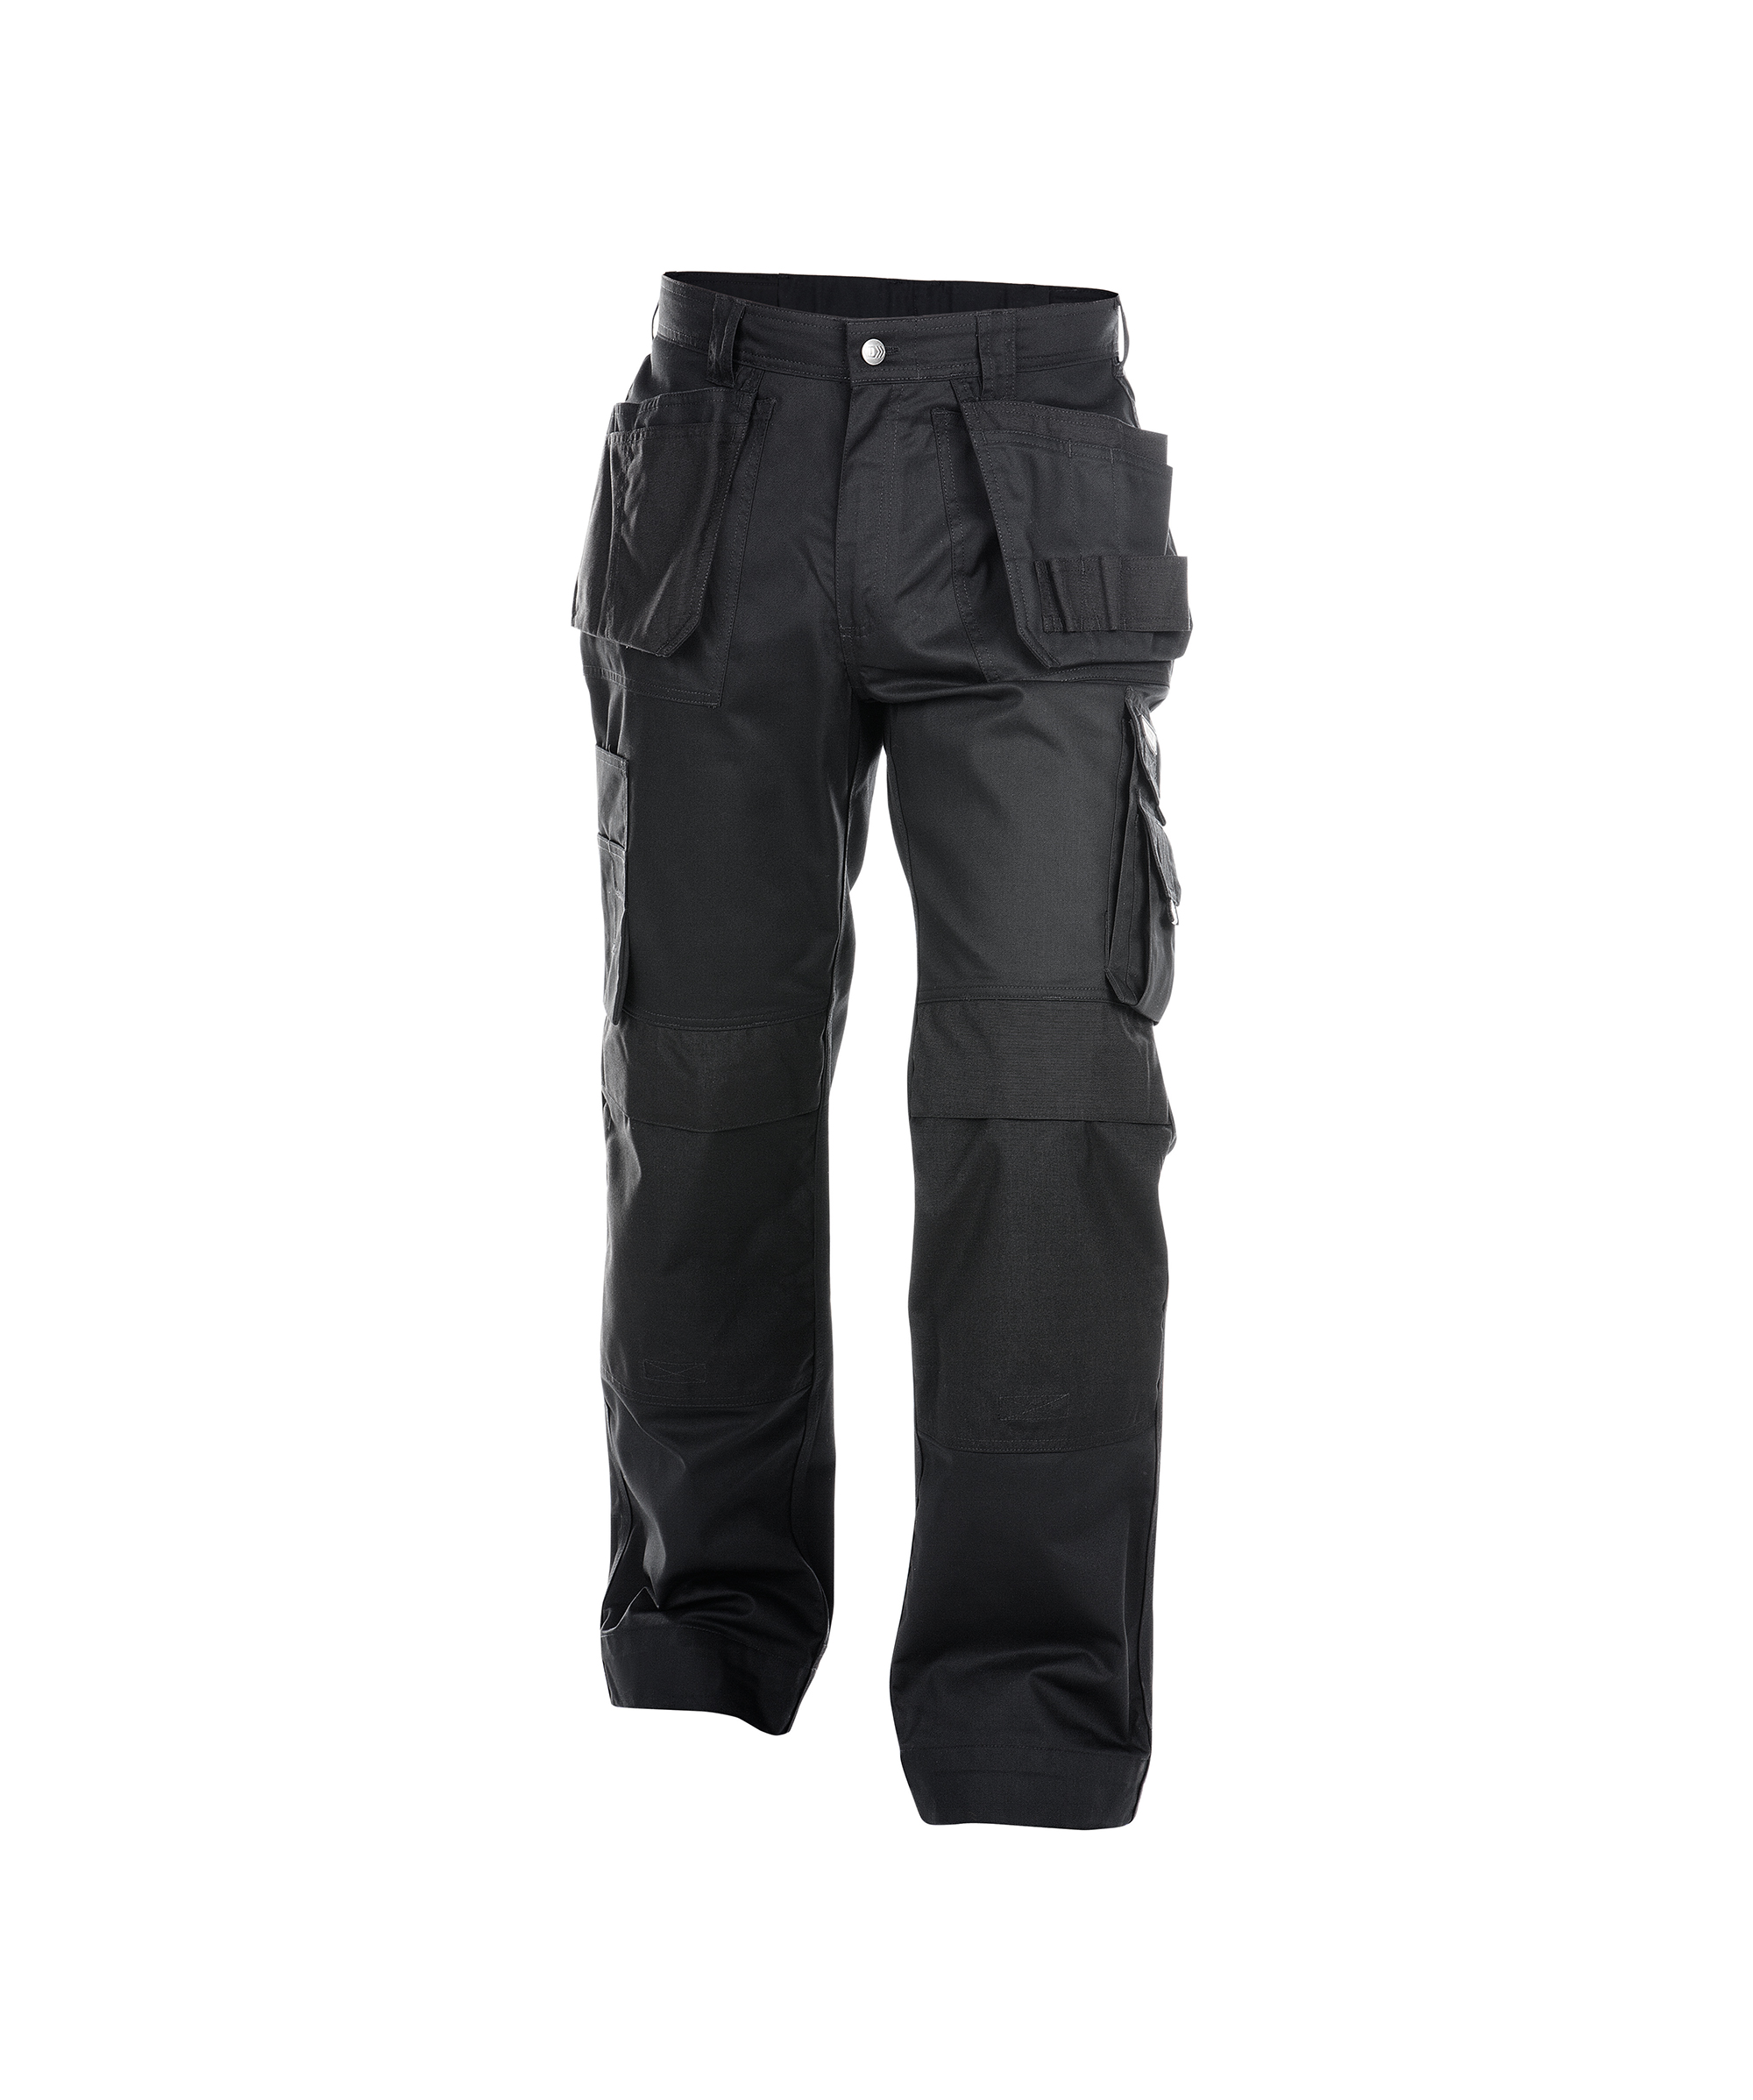 oxford_work-trousers-with-multi-pockets-and-knee-pockets_black_front.jpg